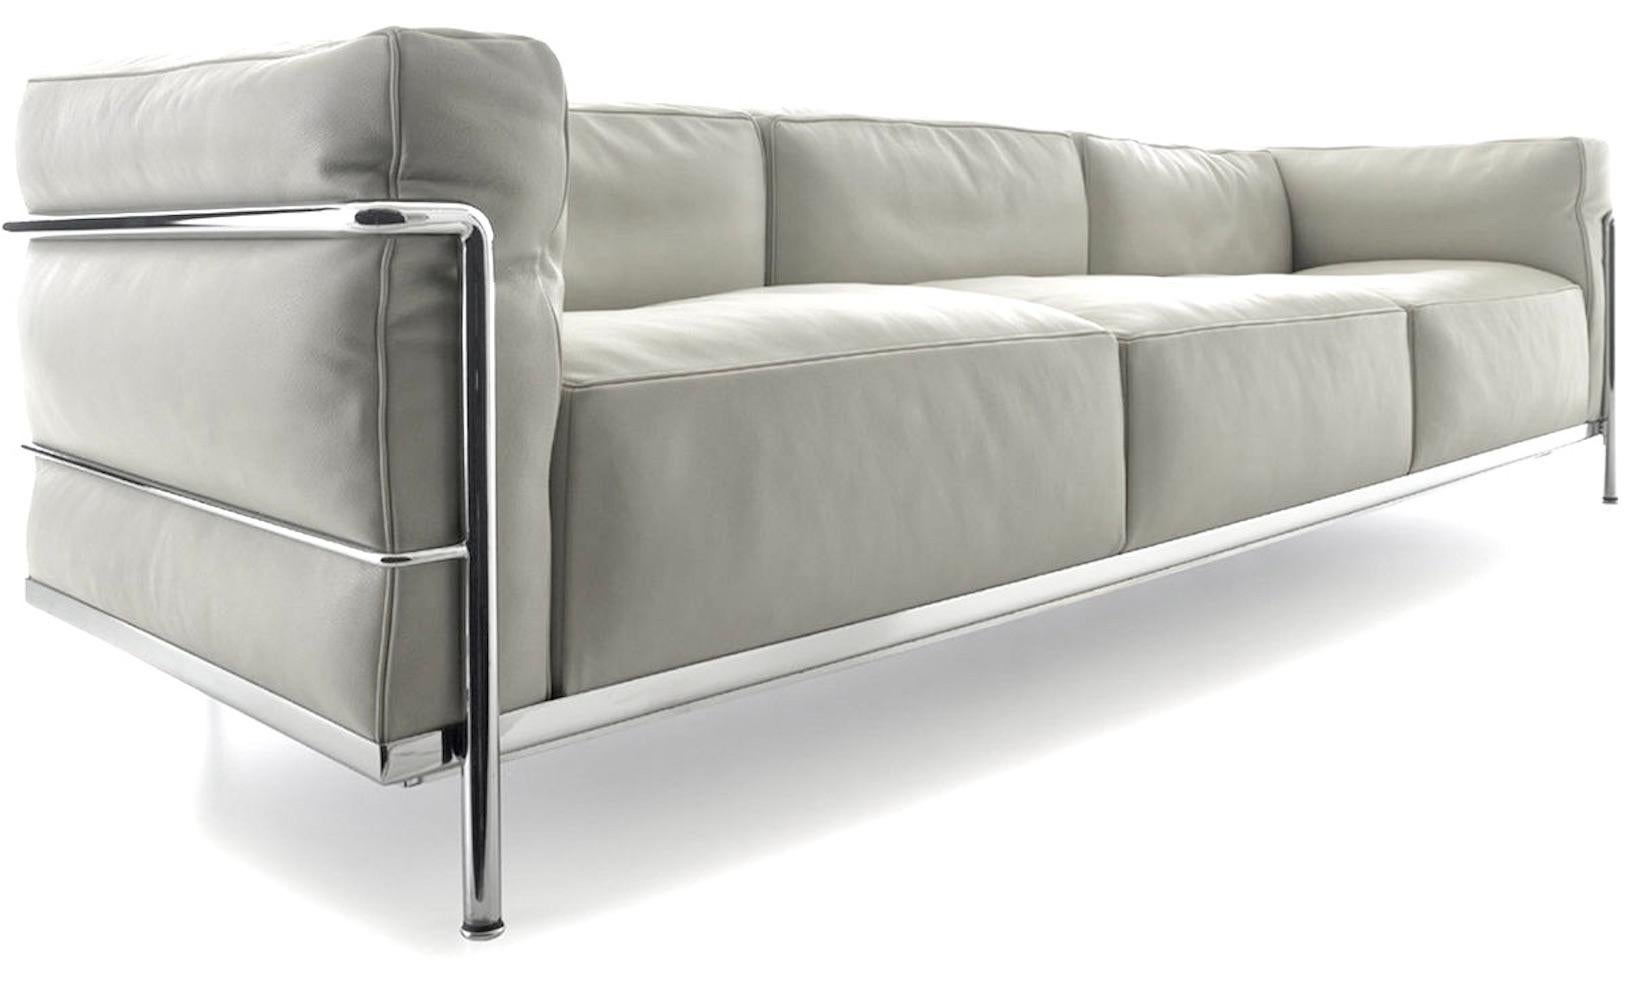 Le Corbusier LC3 grand confort 3-seat sofa, white leather, down, Cassina, Italy. LC3 Divano 3 posti. Cromata structure. Pelle Scozia Bianco. Designed by Le Corbusier, Pierre Jeanneret and Charlotte Perriand in 1928; Made in Italy by Cassina. 
This